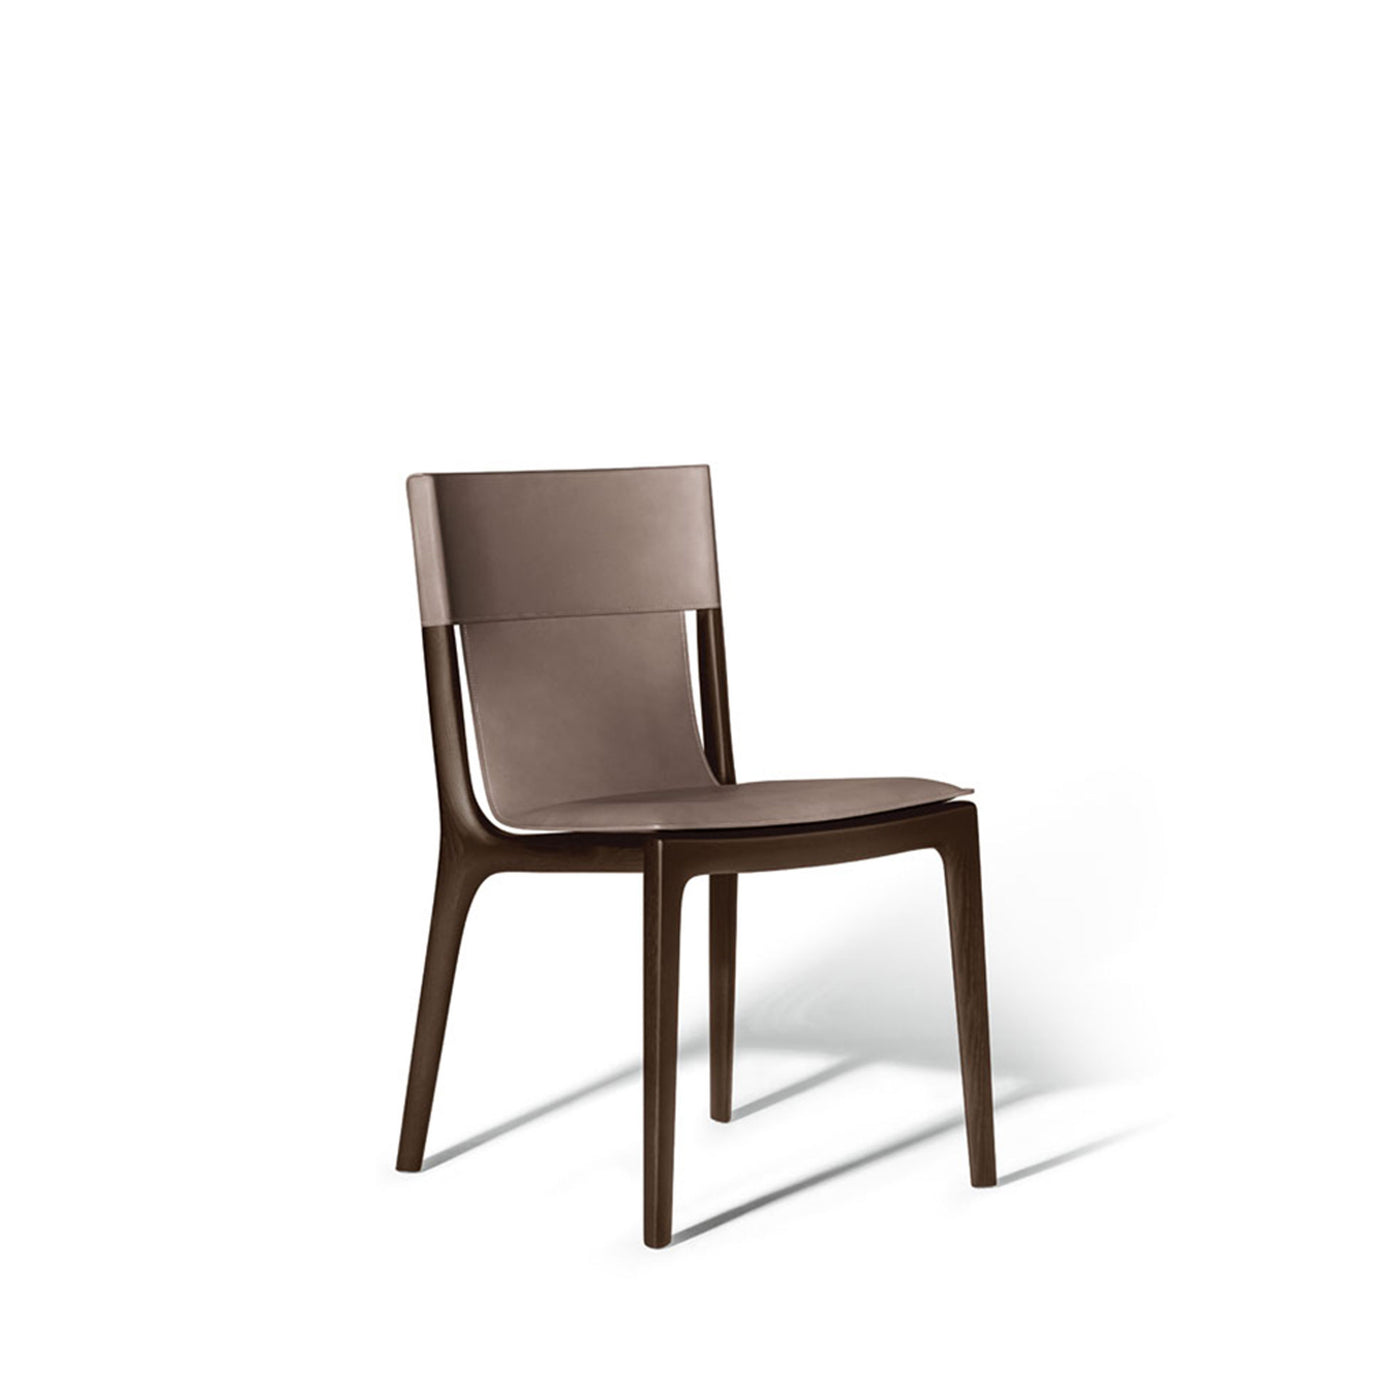 Leather Dining Chair ISADORA by Roberto Lazzeroni for Poltrona Frau 06